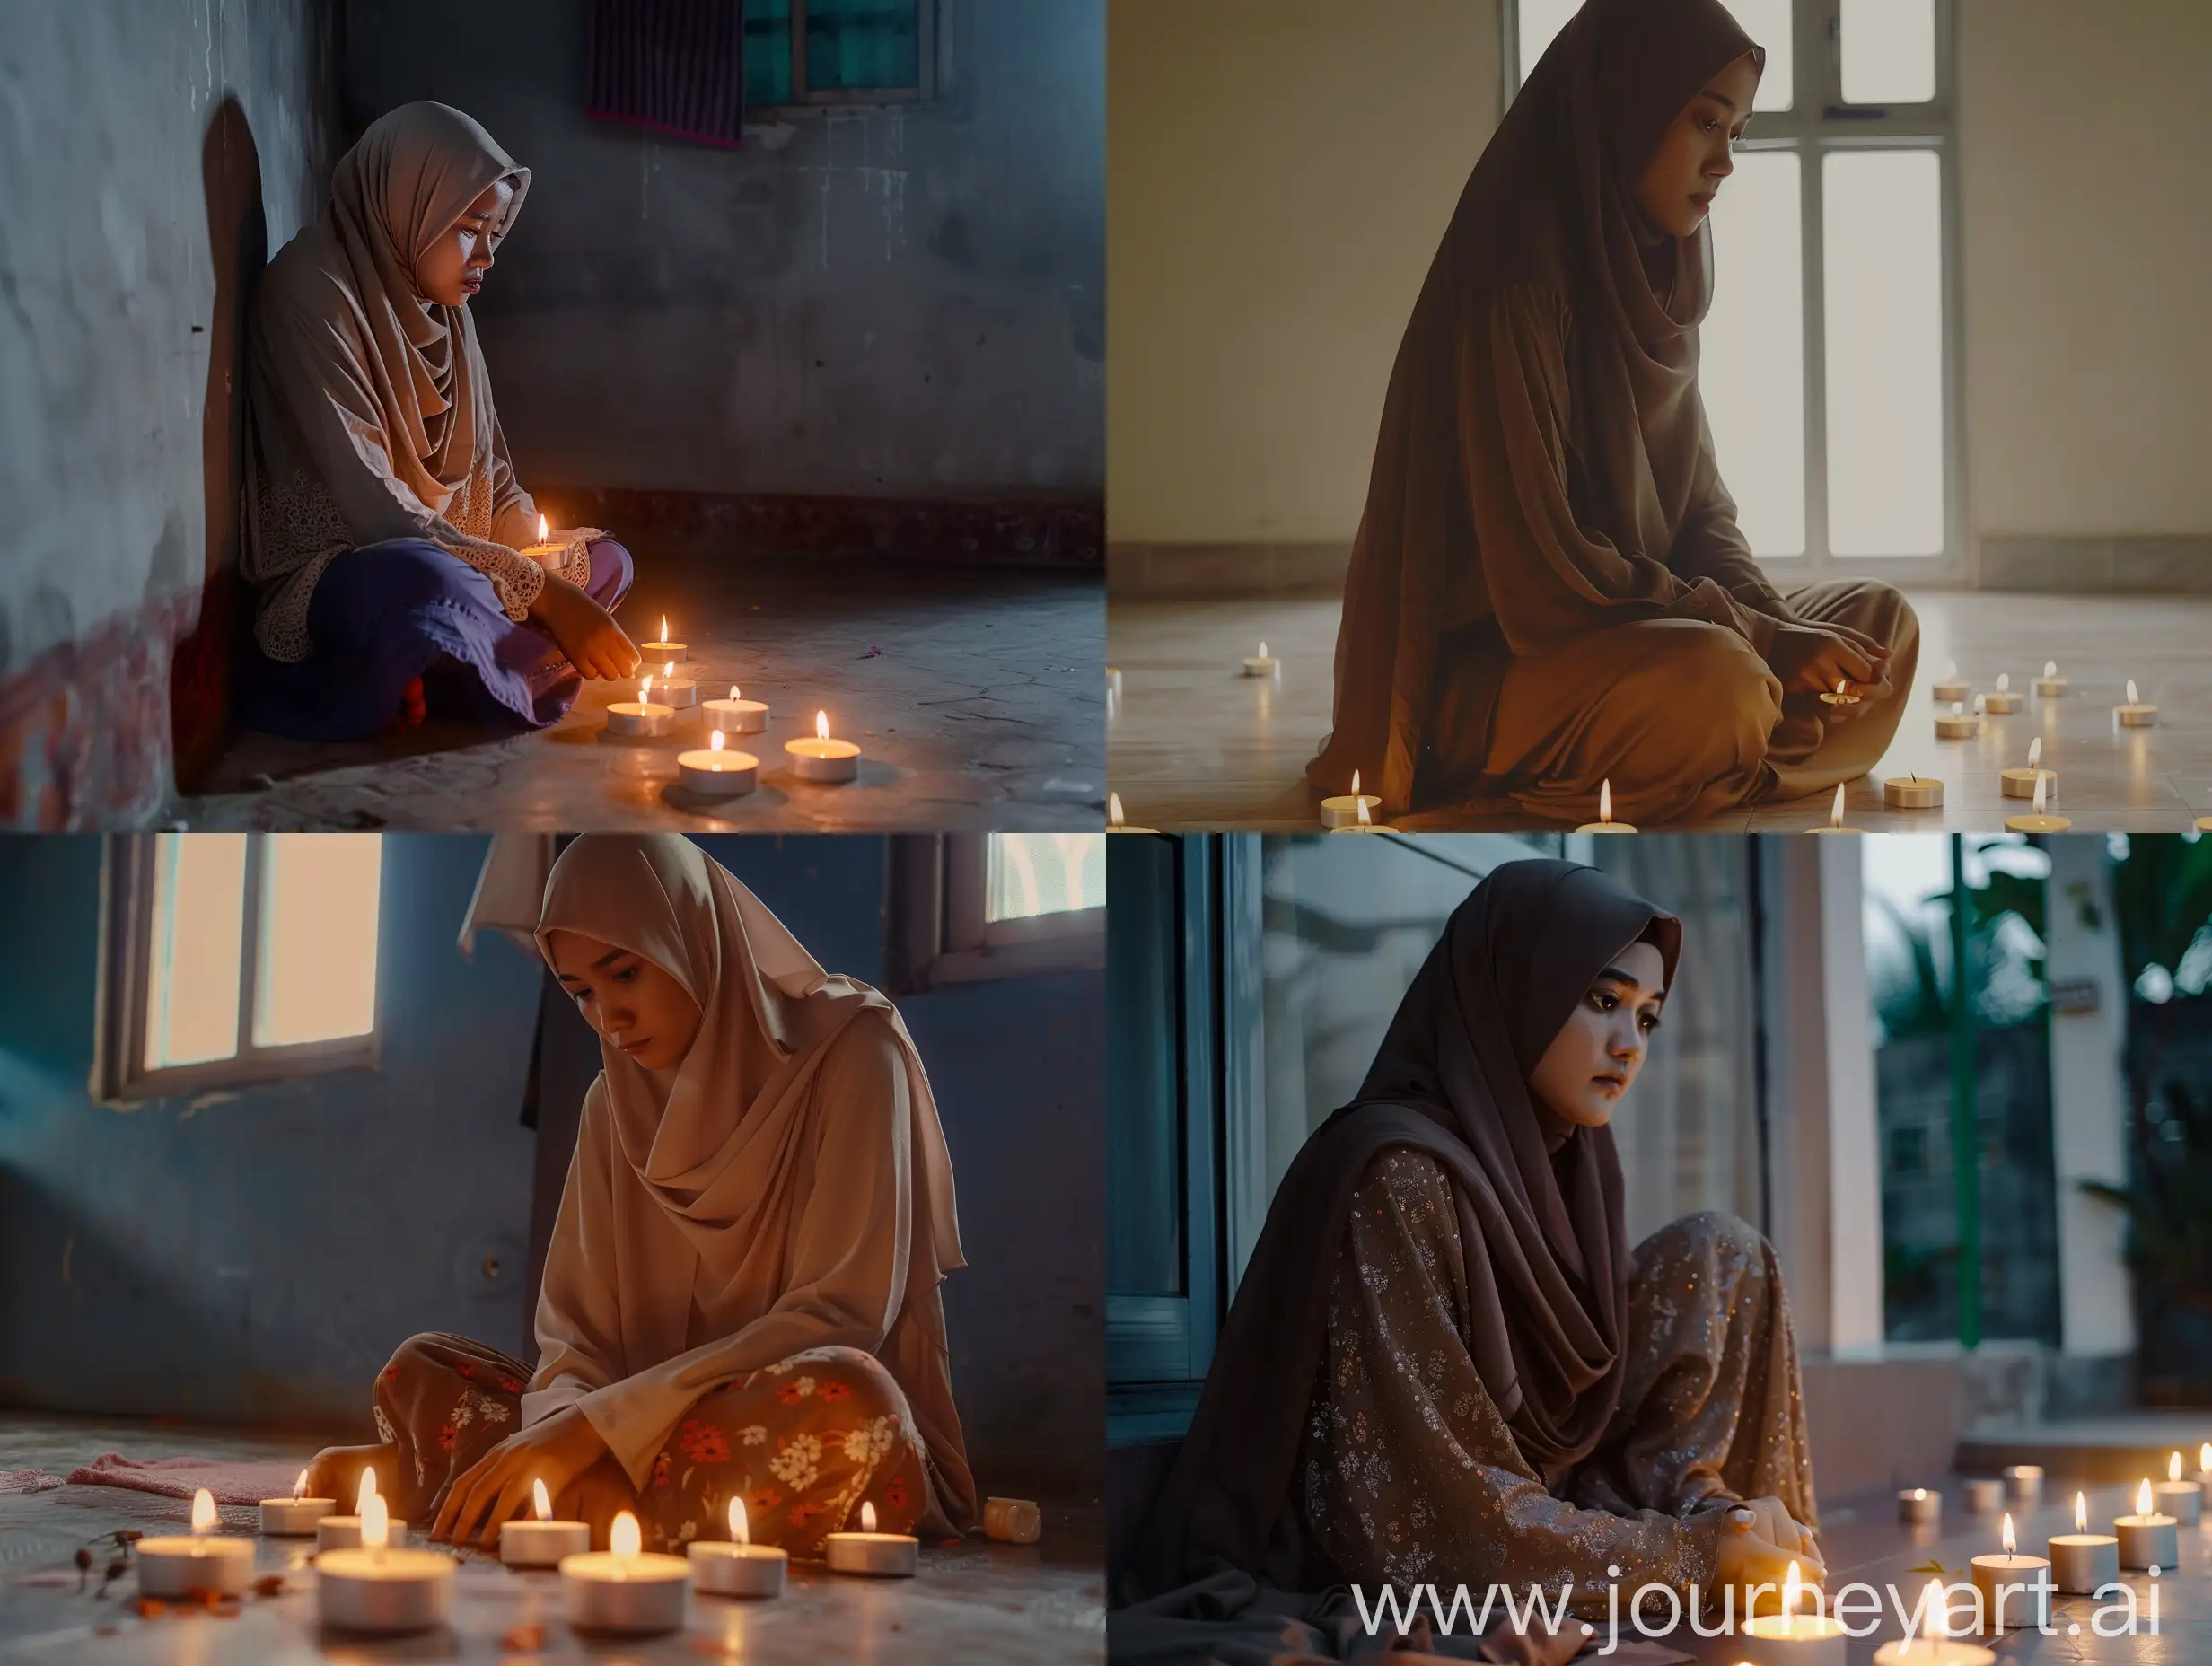 Mysterious-Atmosphere-Indonesian-Woman-in-Hijab-Lighting-Candles-in-Simple-House